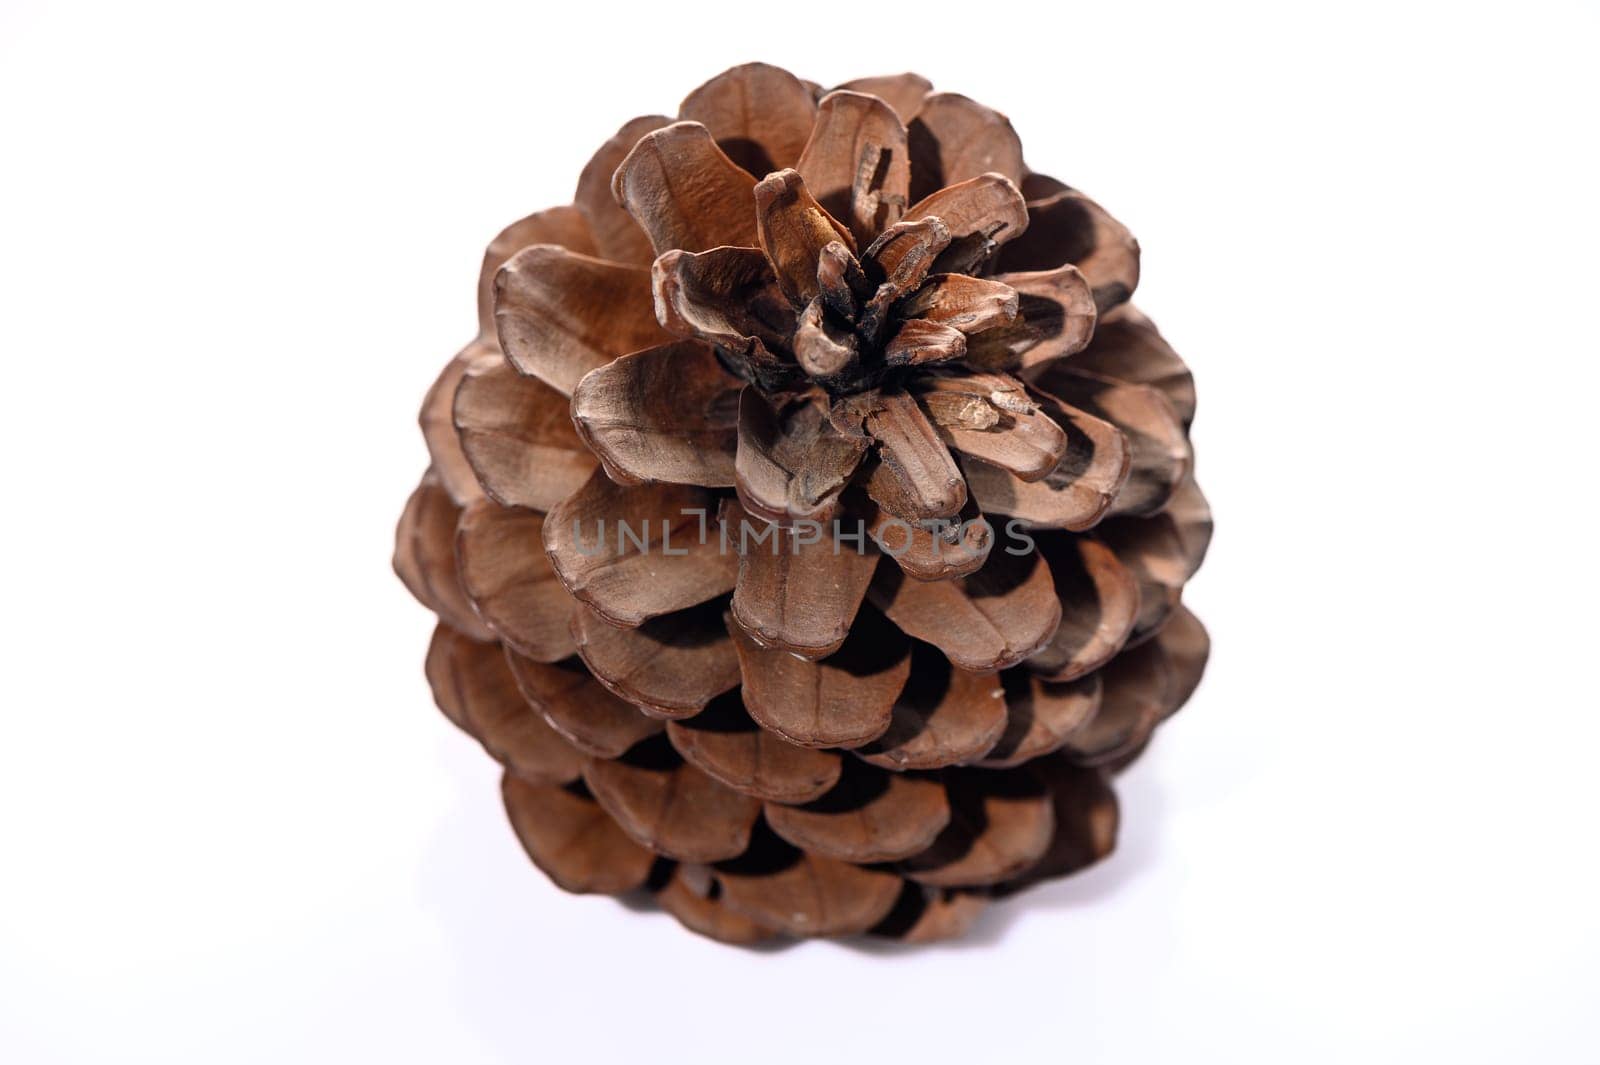 conifer cone on a white background 1